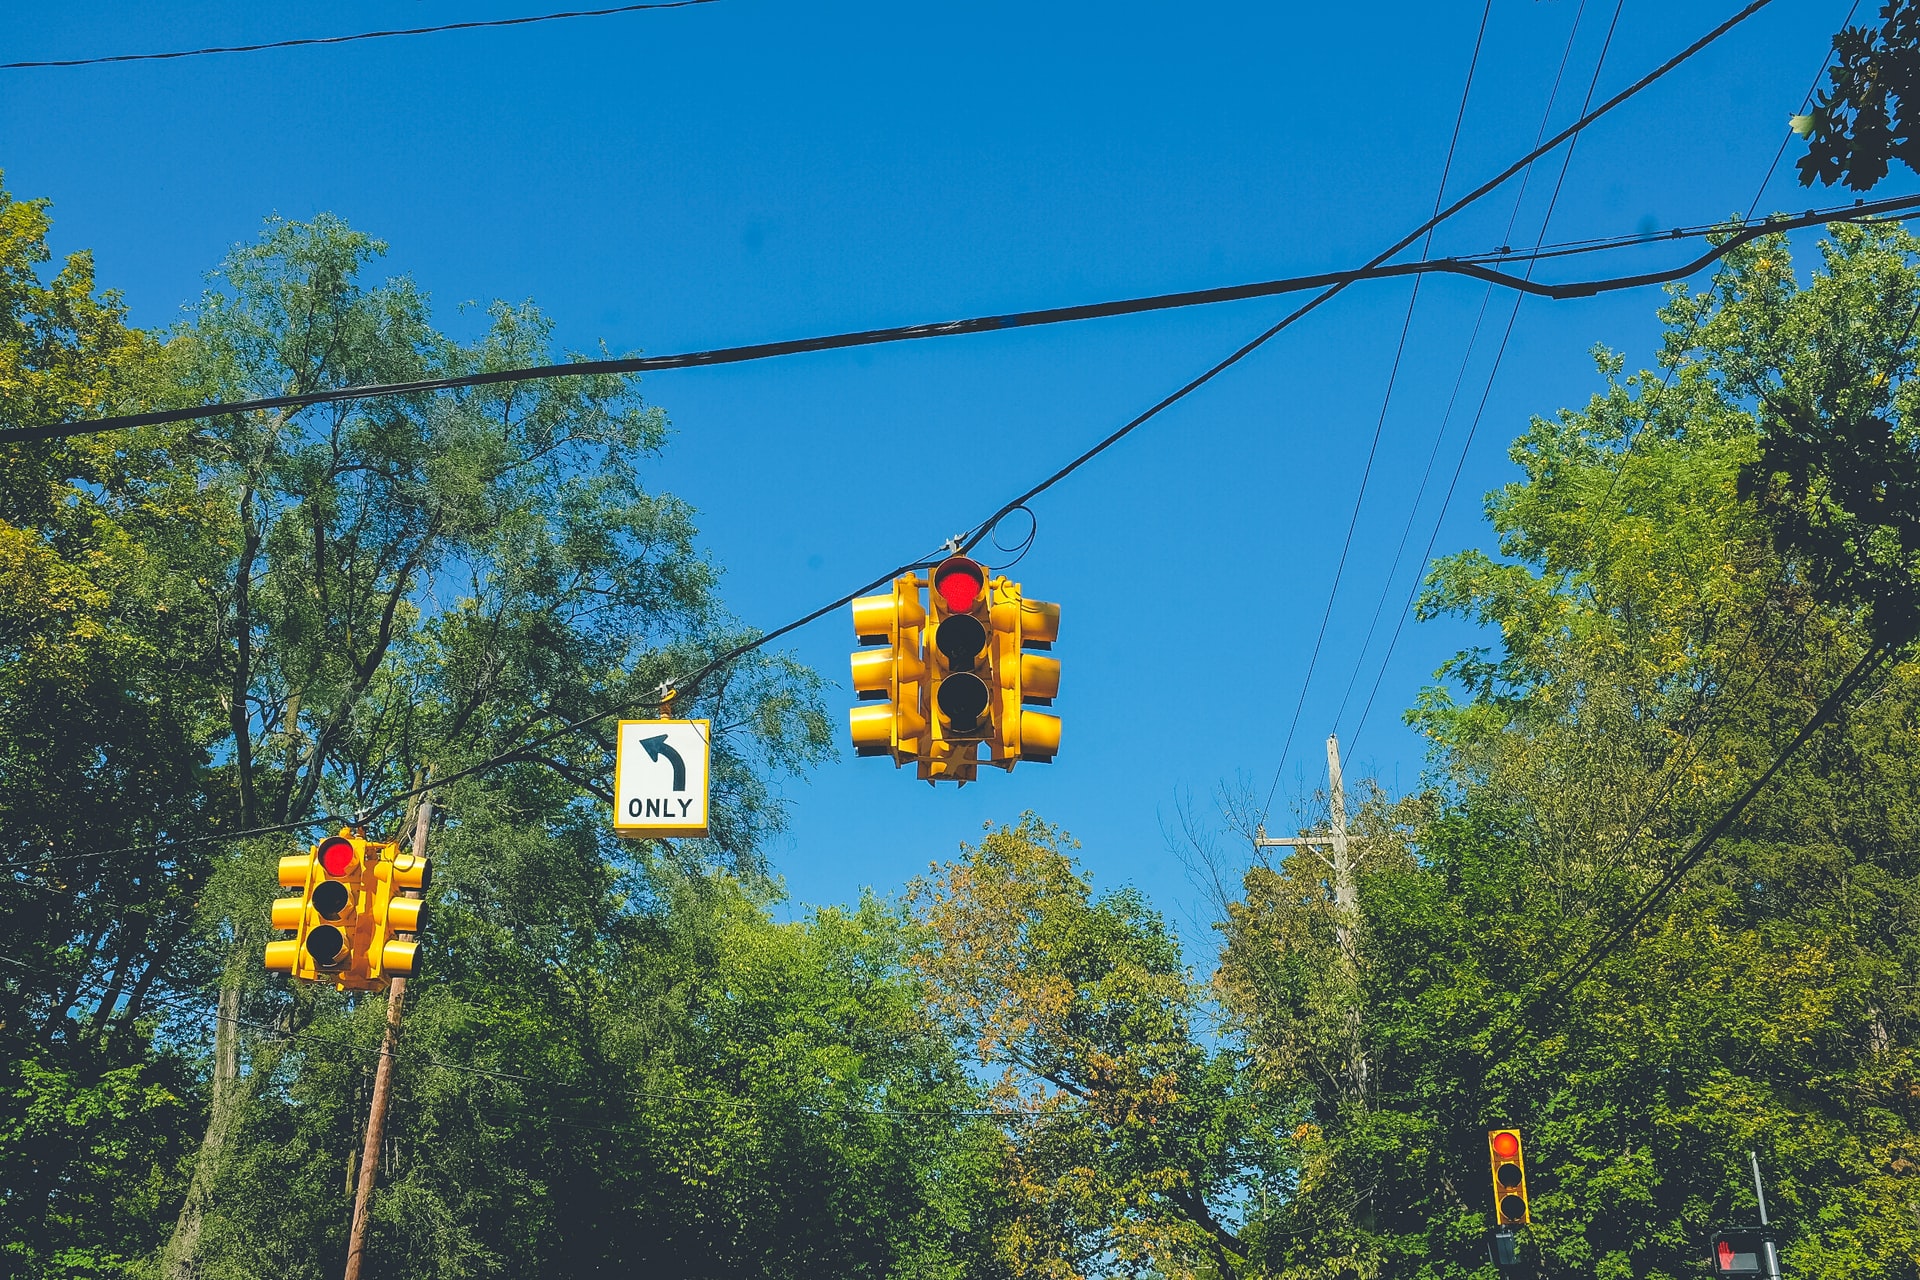 Traffic lights representing the effectiveness of red light cameras in decreasing car accidents